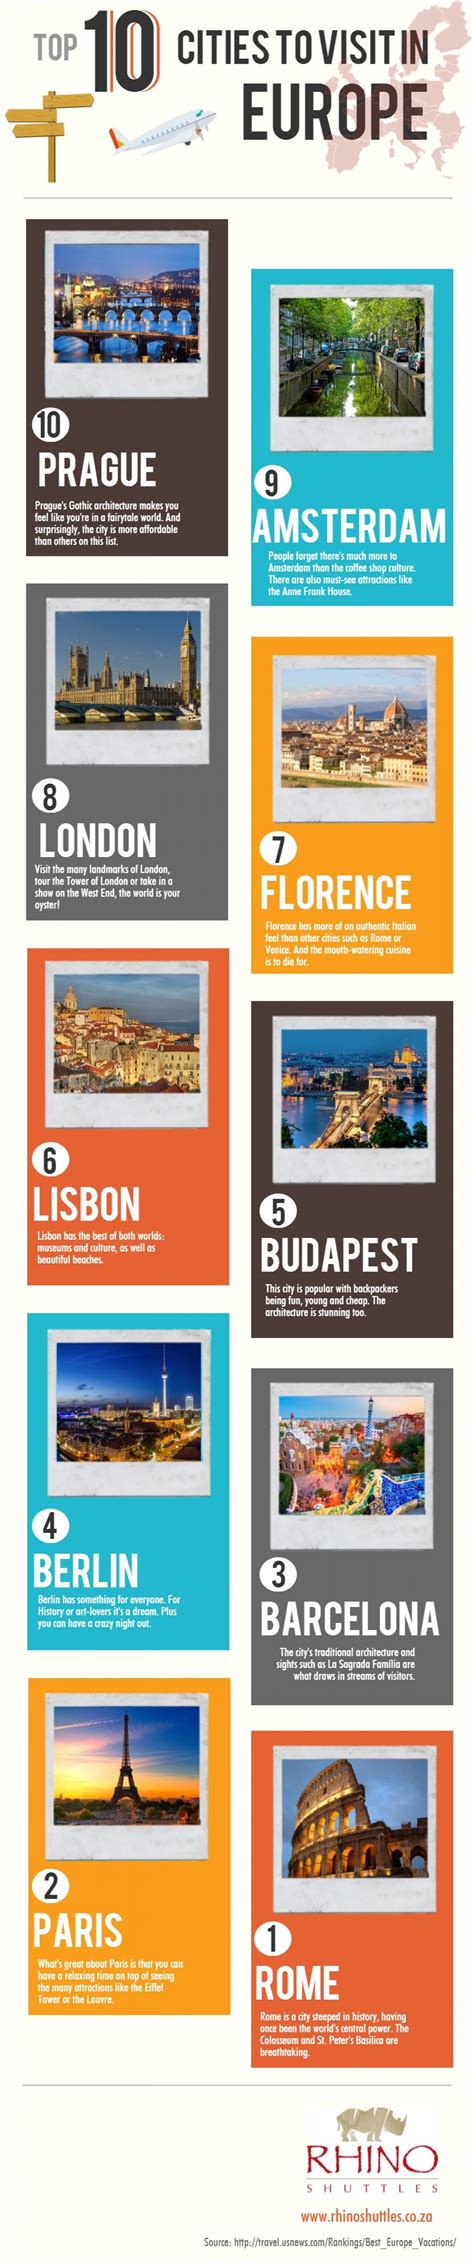 Top 10 Cities to Visit in Europe | Visual.ly | Europe travel, Europe, Backpacking europe